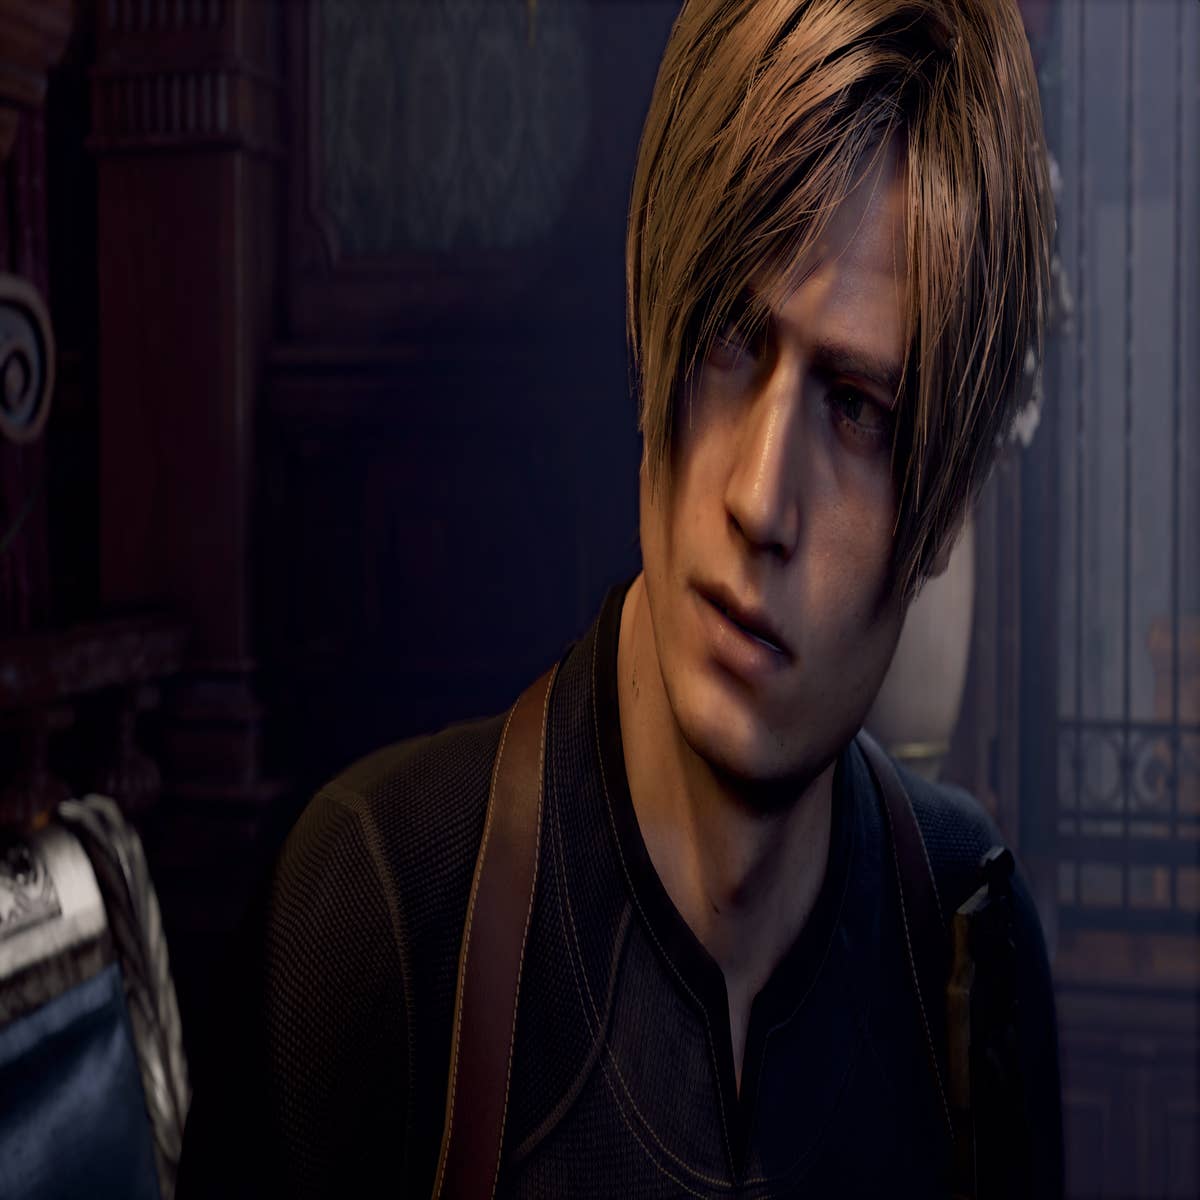 Resident Evil 4 Remake Demo Releases Today, New Gameplay Video Crawls Out